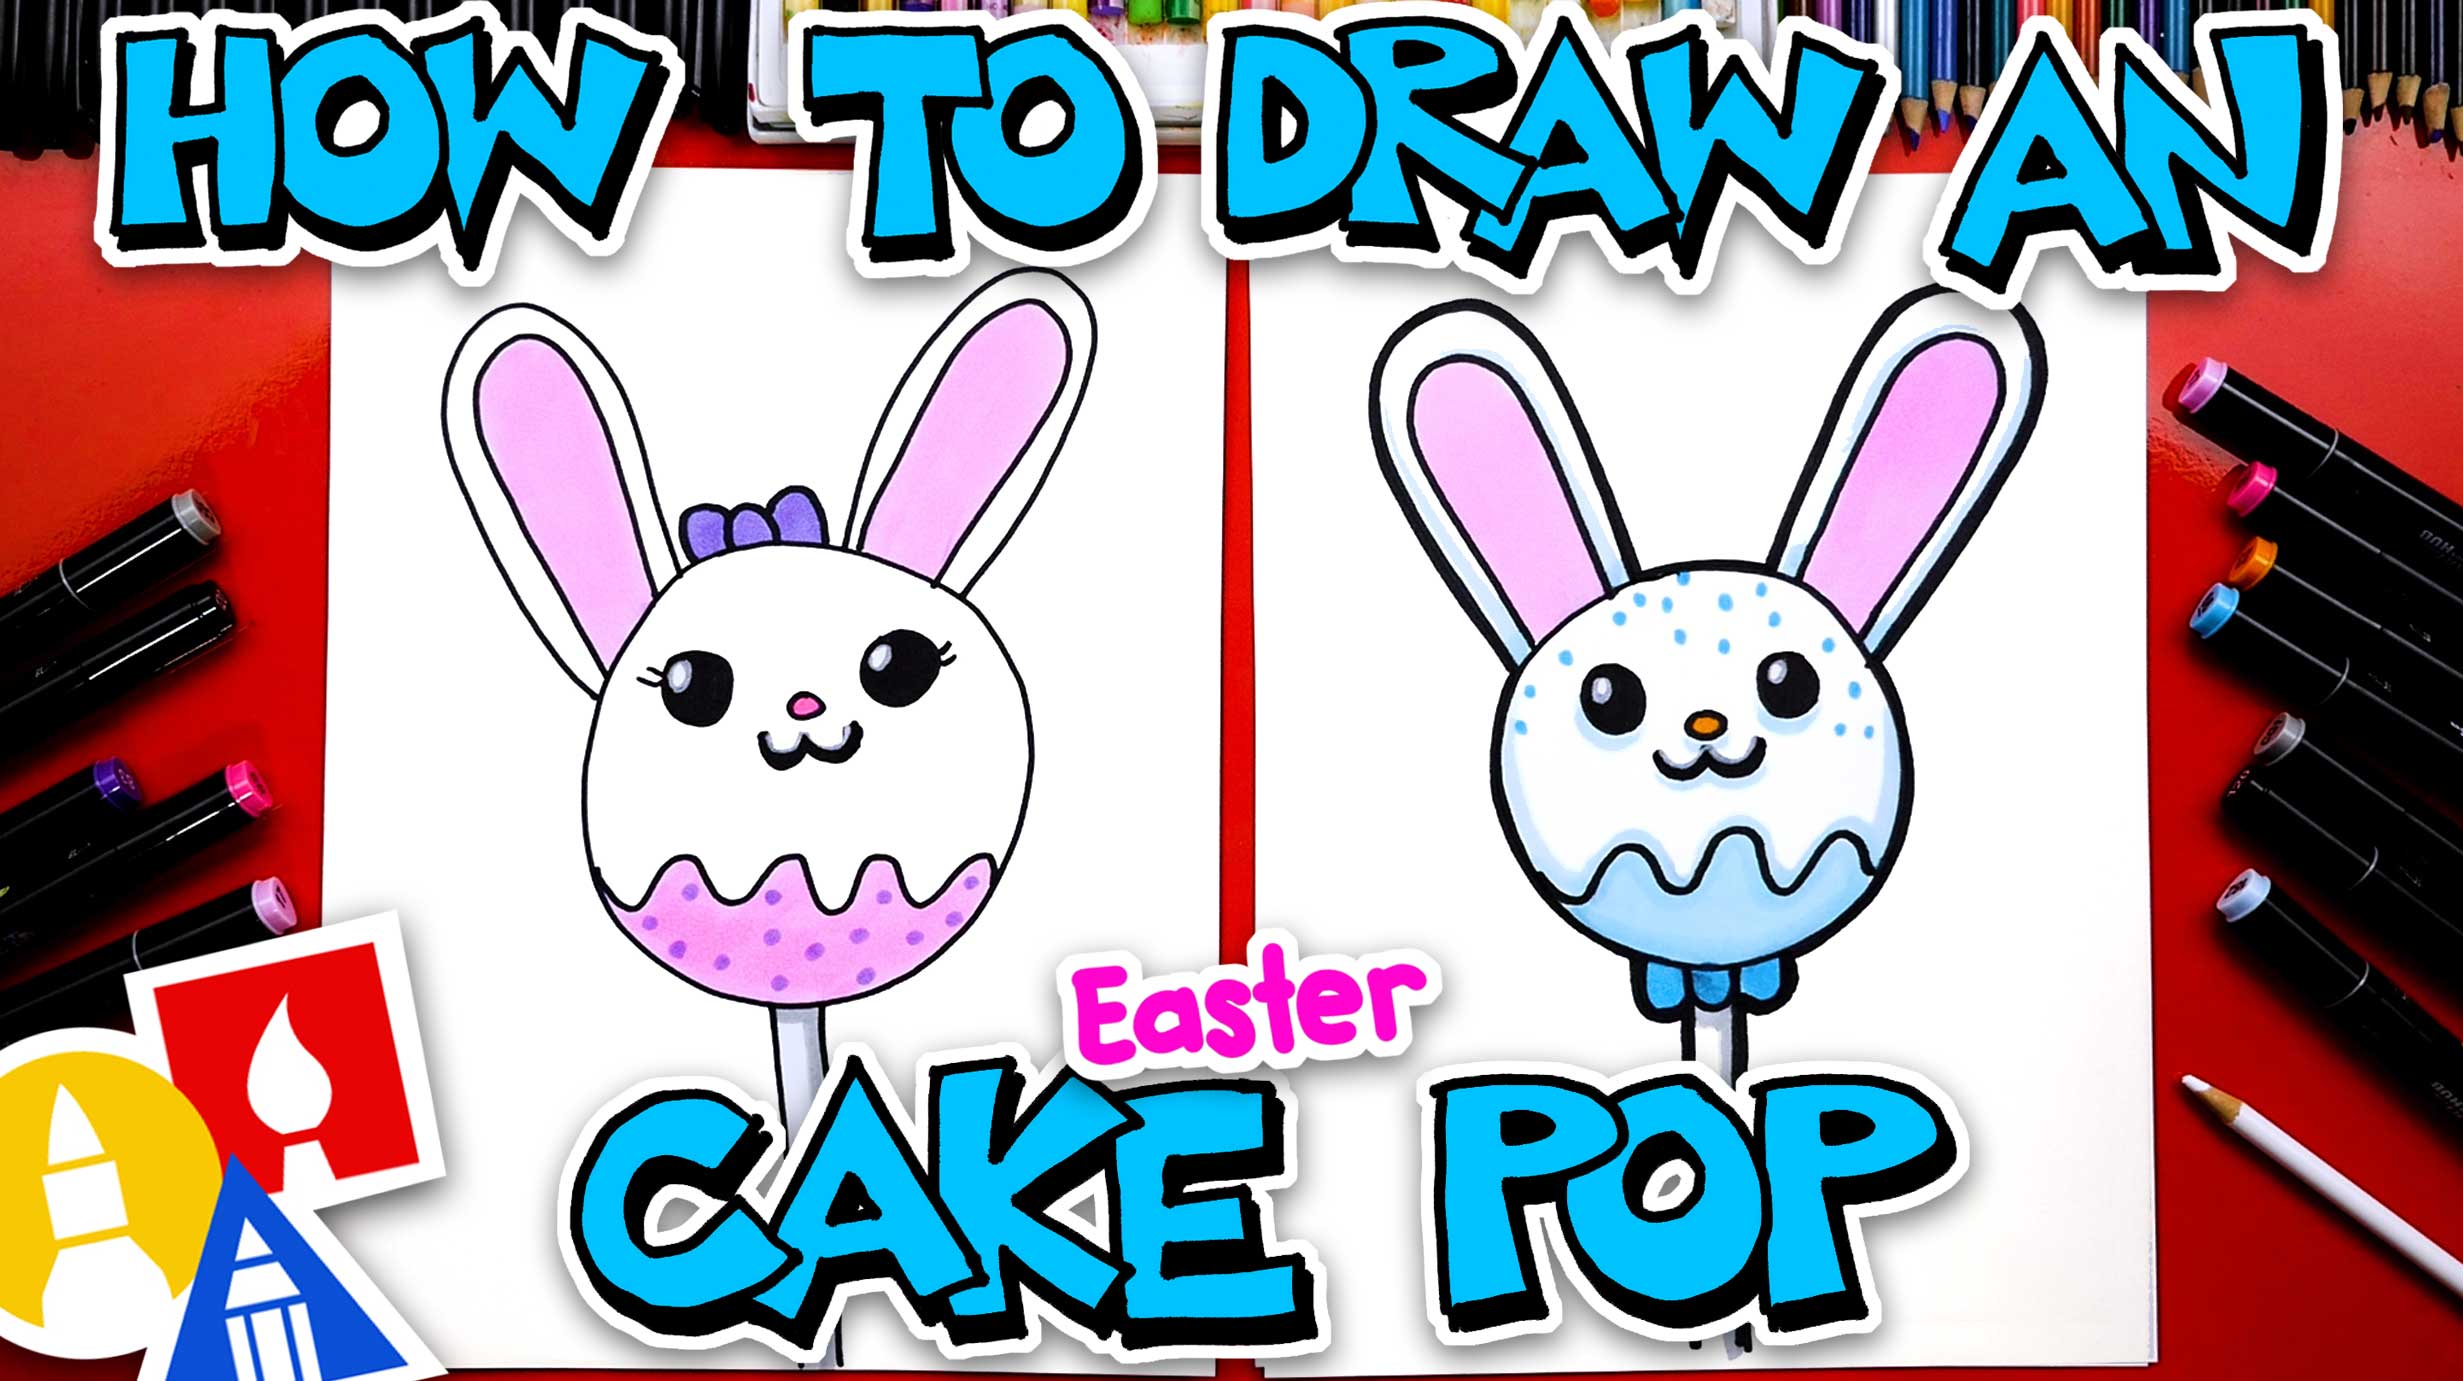 How To Draw An Easter Cake Pop - Art For Kids Hub 